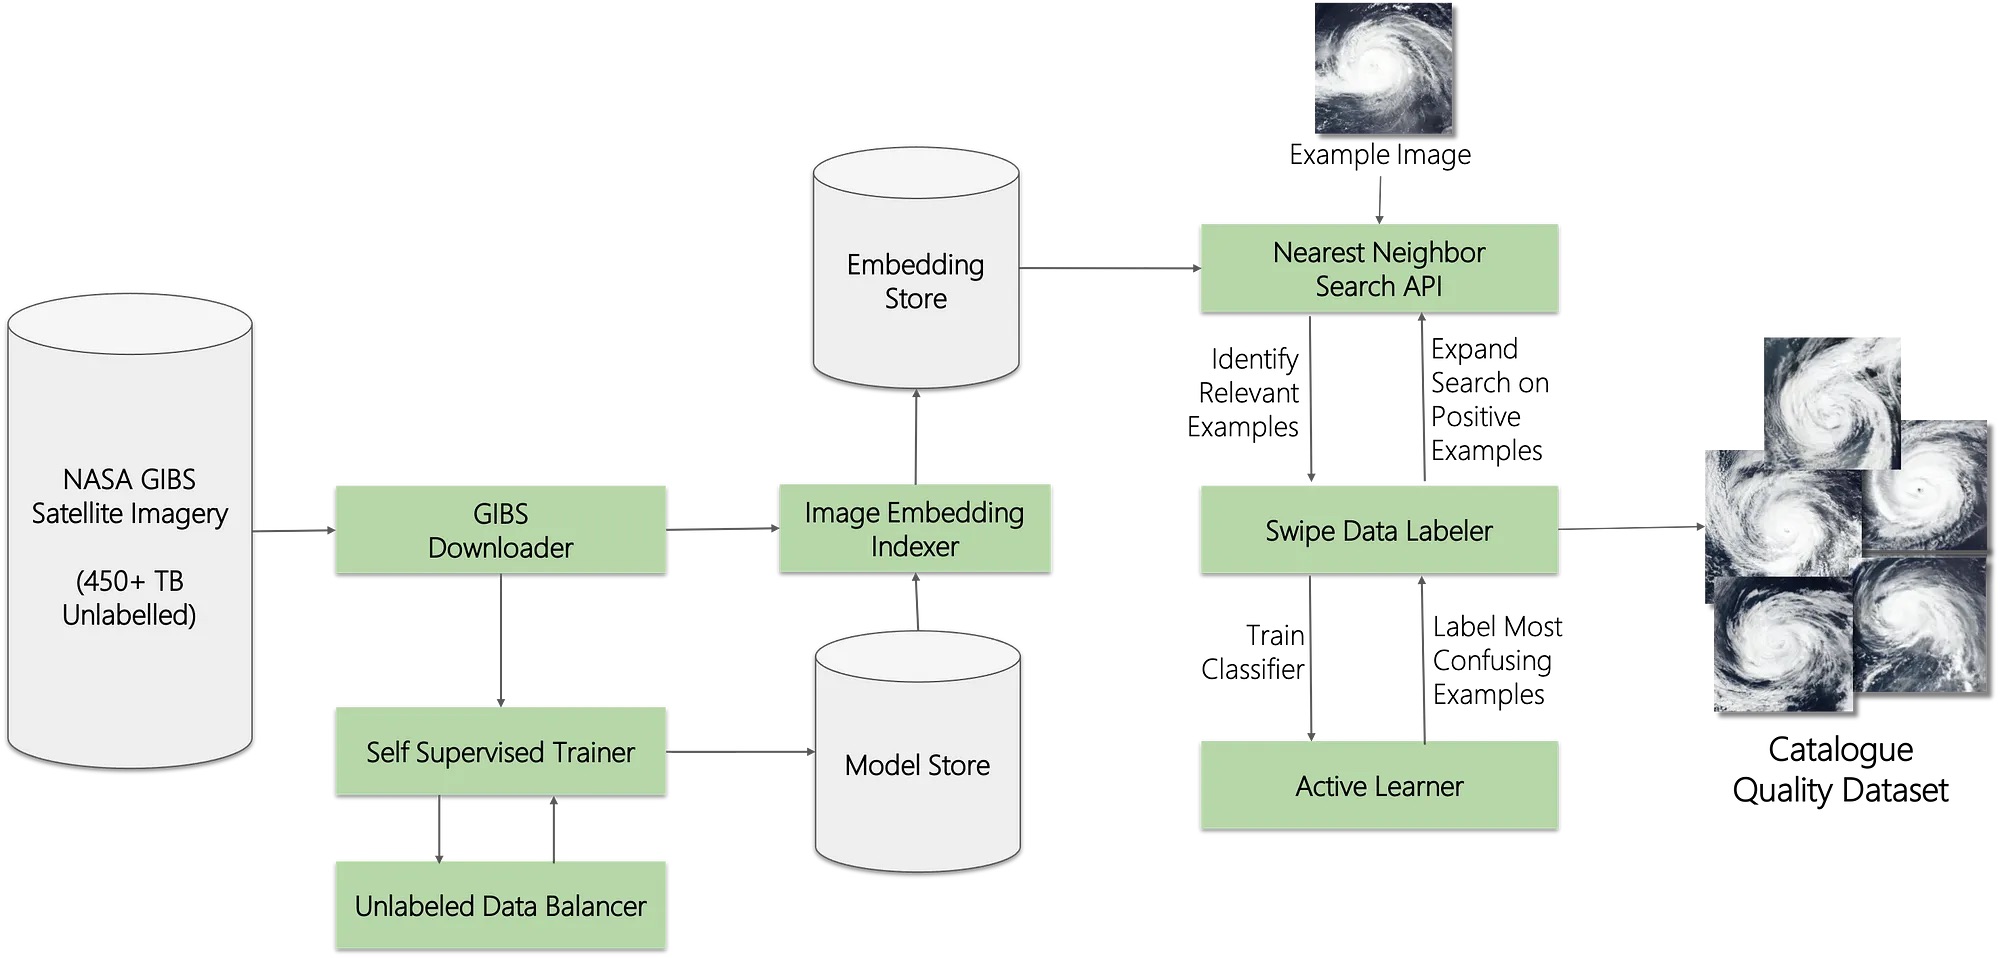 Graphic showing the Worldview Image Search Pipeline